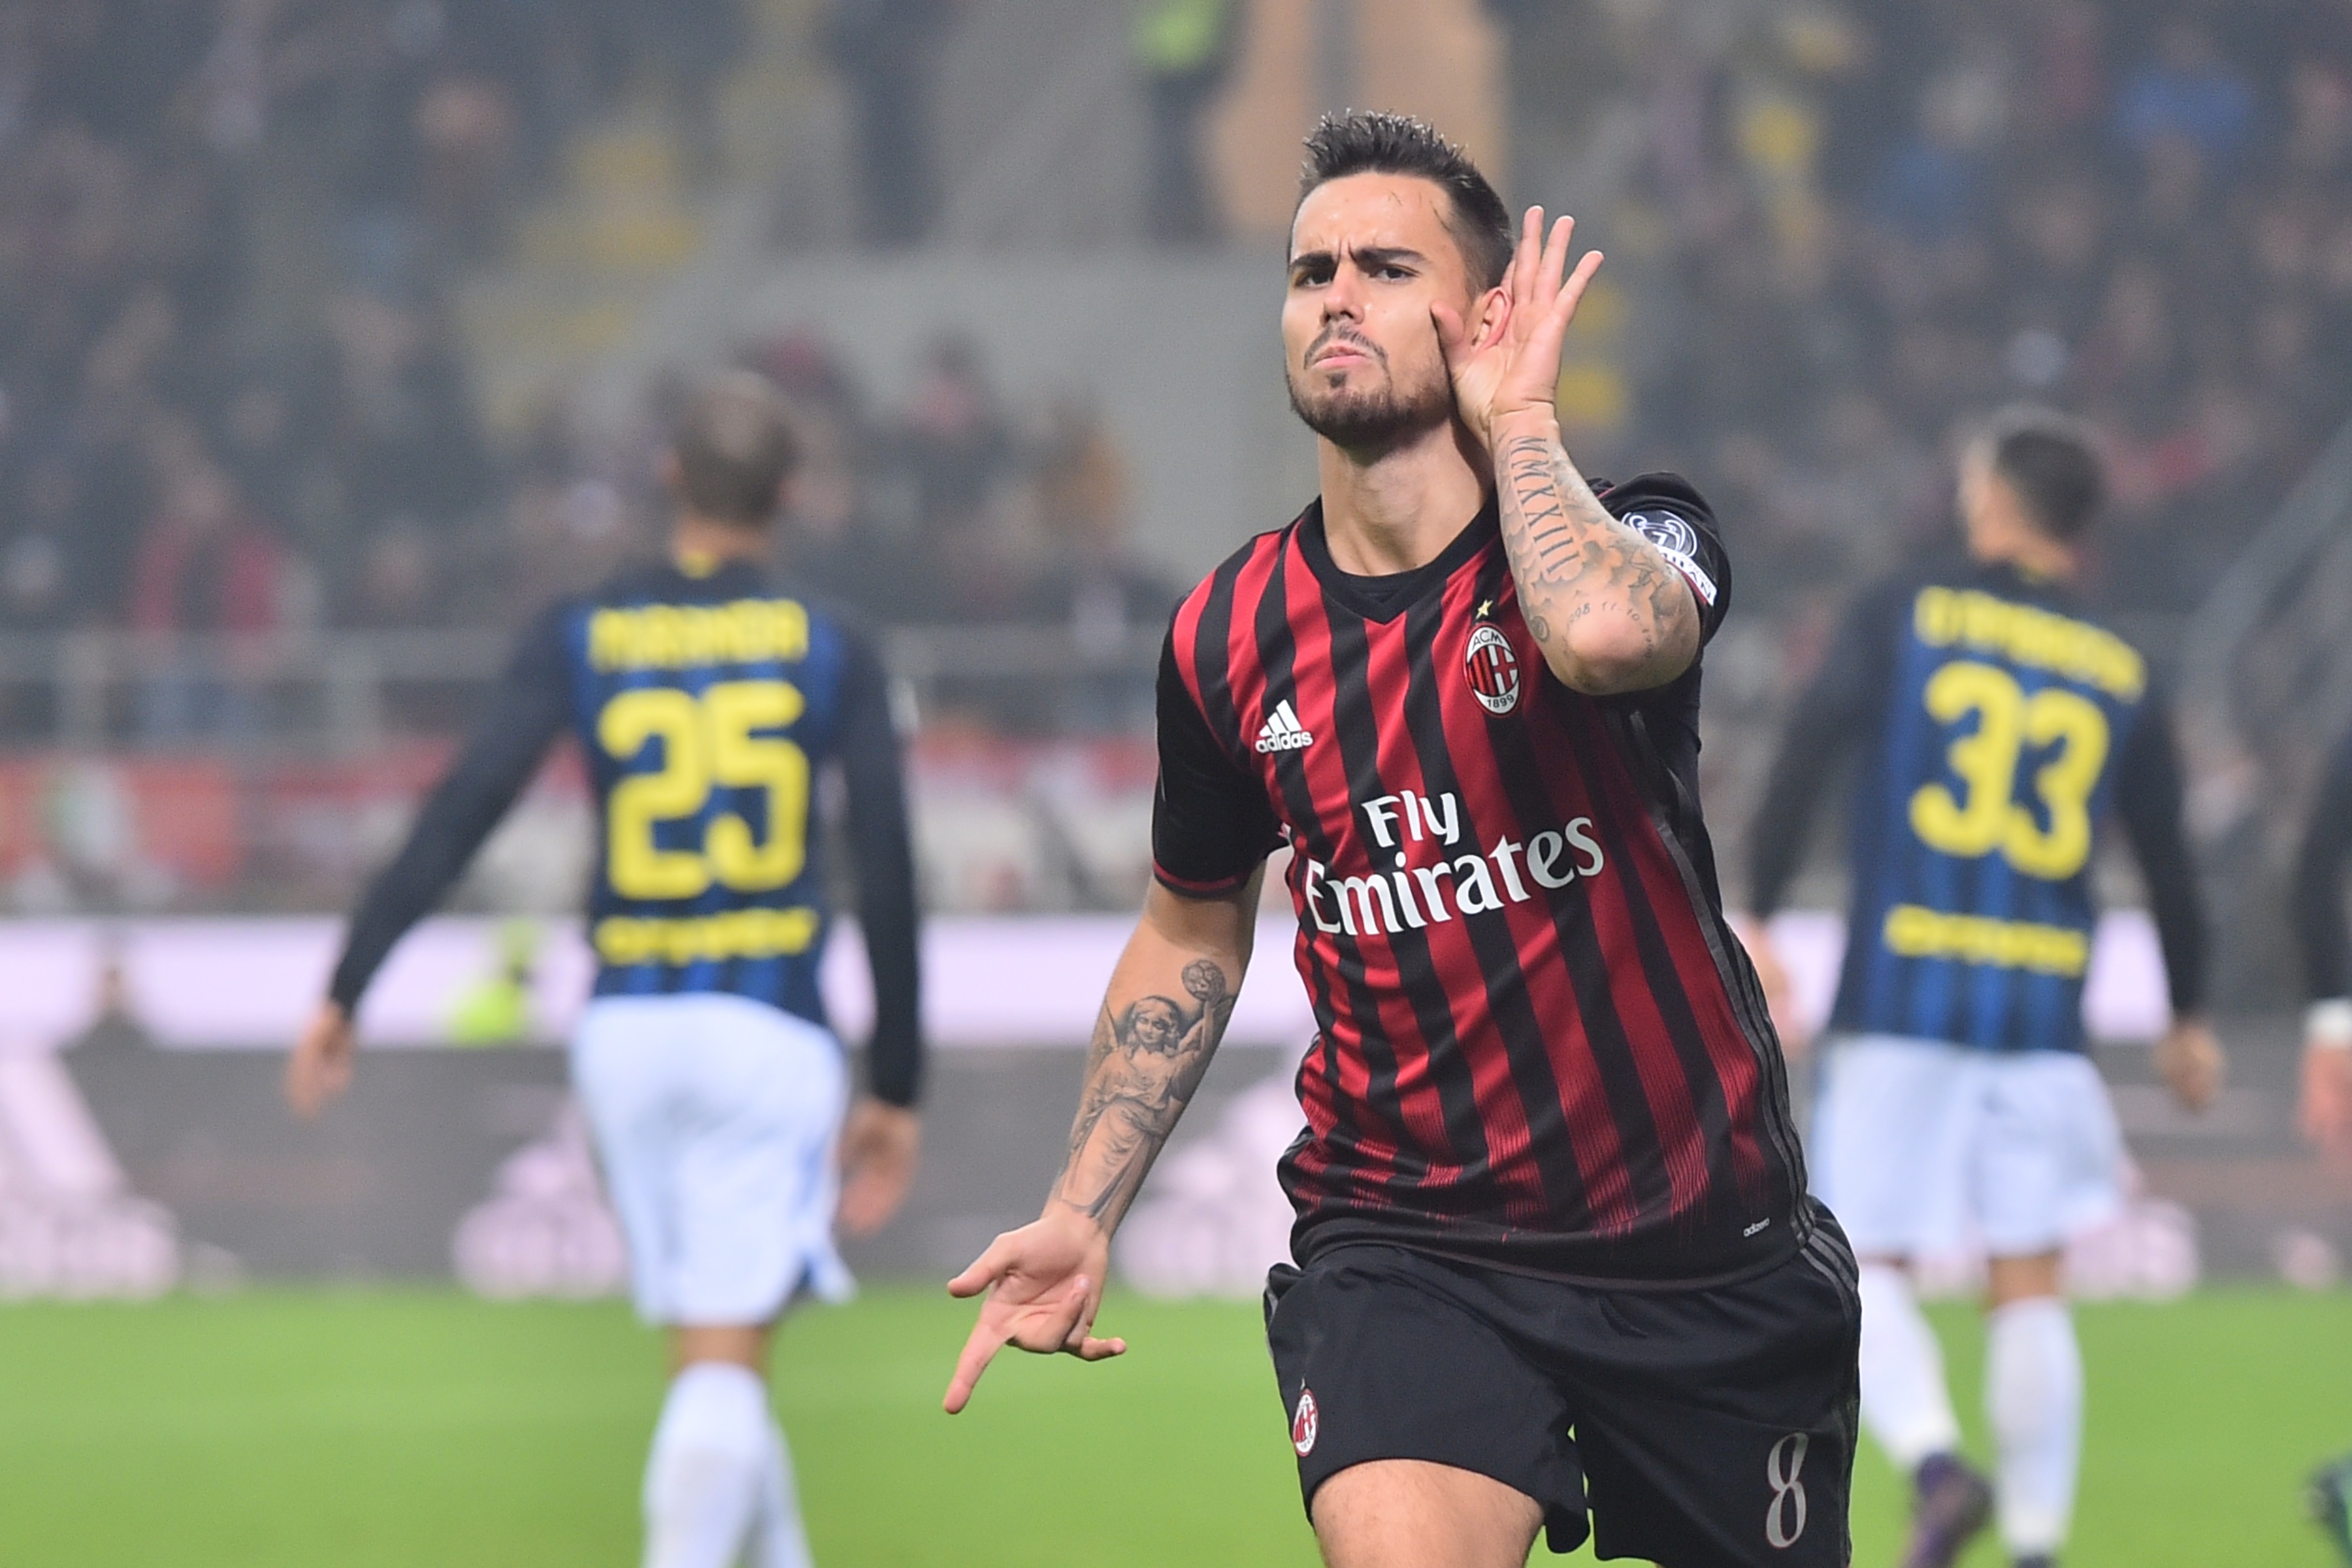 AC Milan's forward from Spain Suso celebrates after scoring during the Italian Serie A football match AC Milan Vs Inter Milan on November 20, 2016 at the 'San Siro Stadium' in Milan. / AFP / GIUSEPPE CACACE (Photo credit should read GIUSEPPE CACACE/AFP/Getty Images)